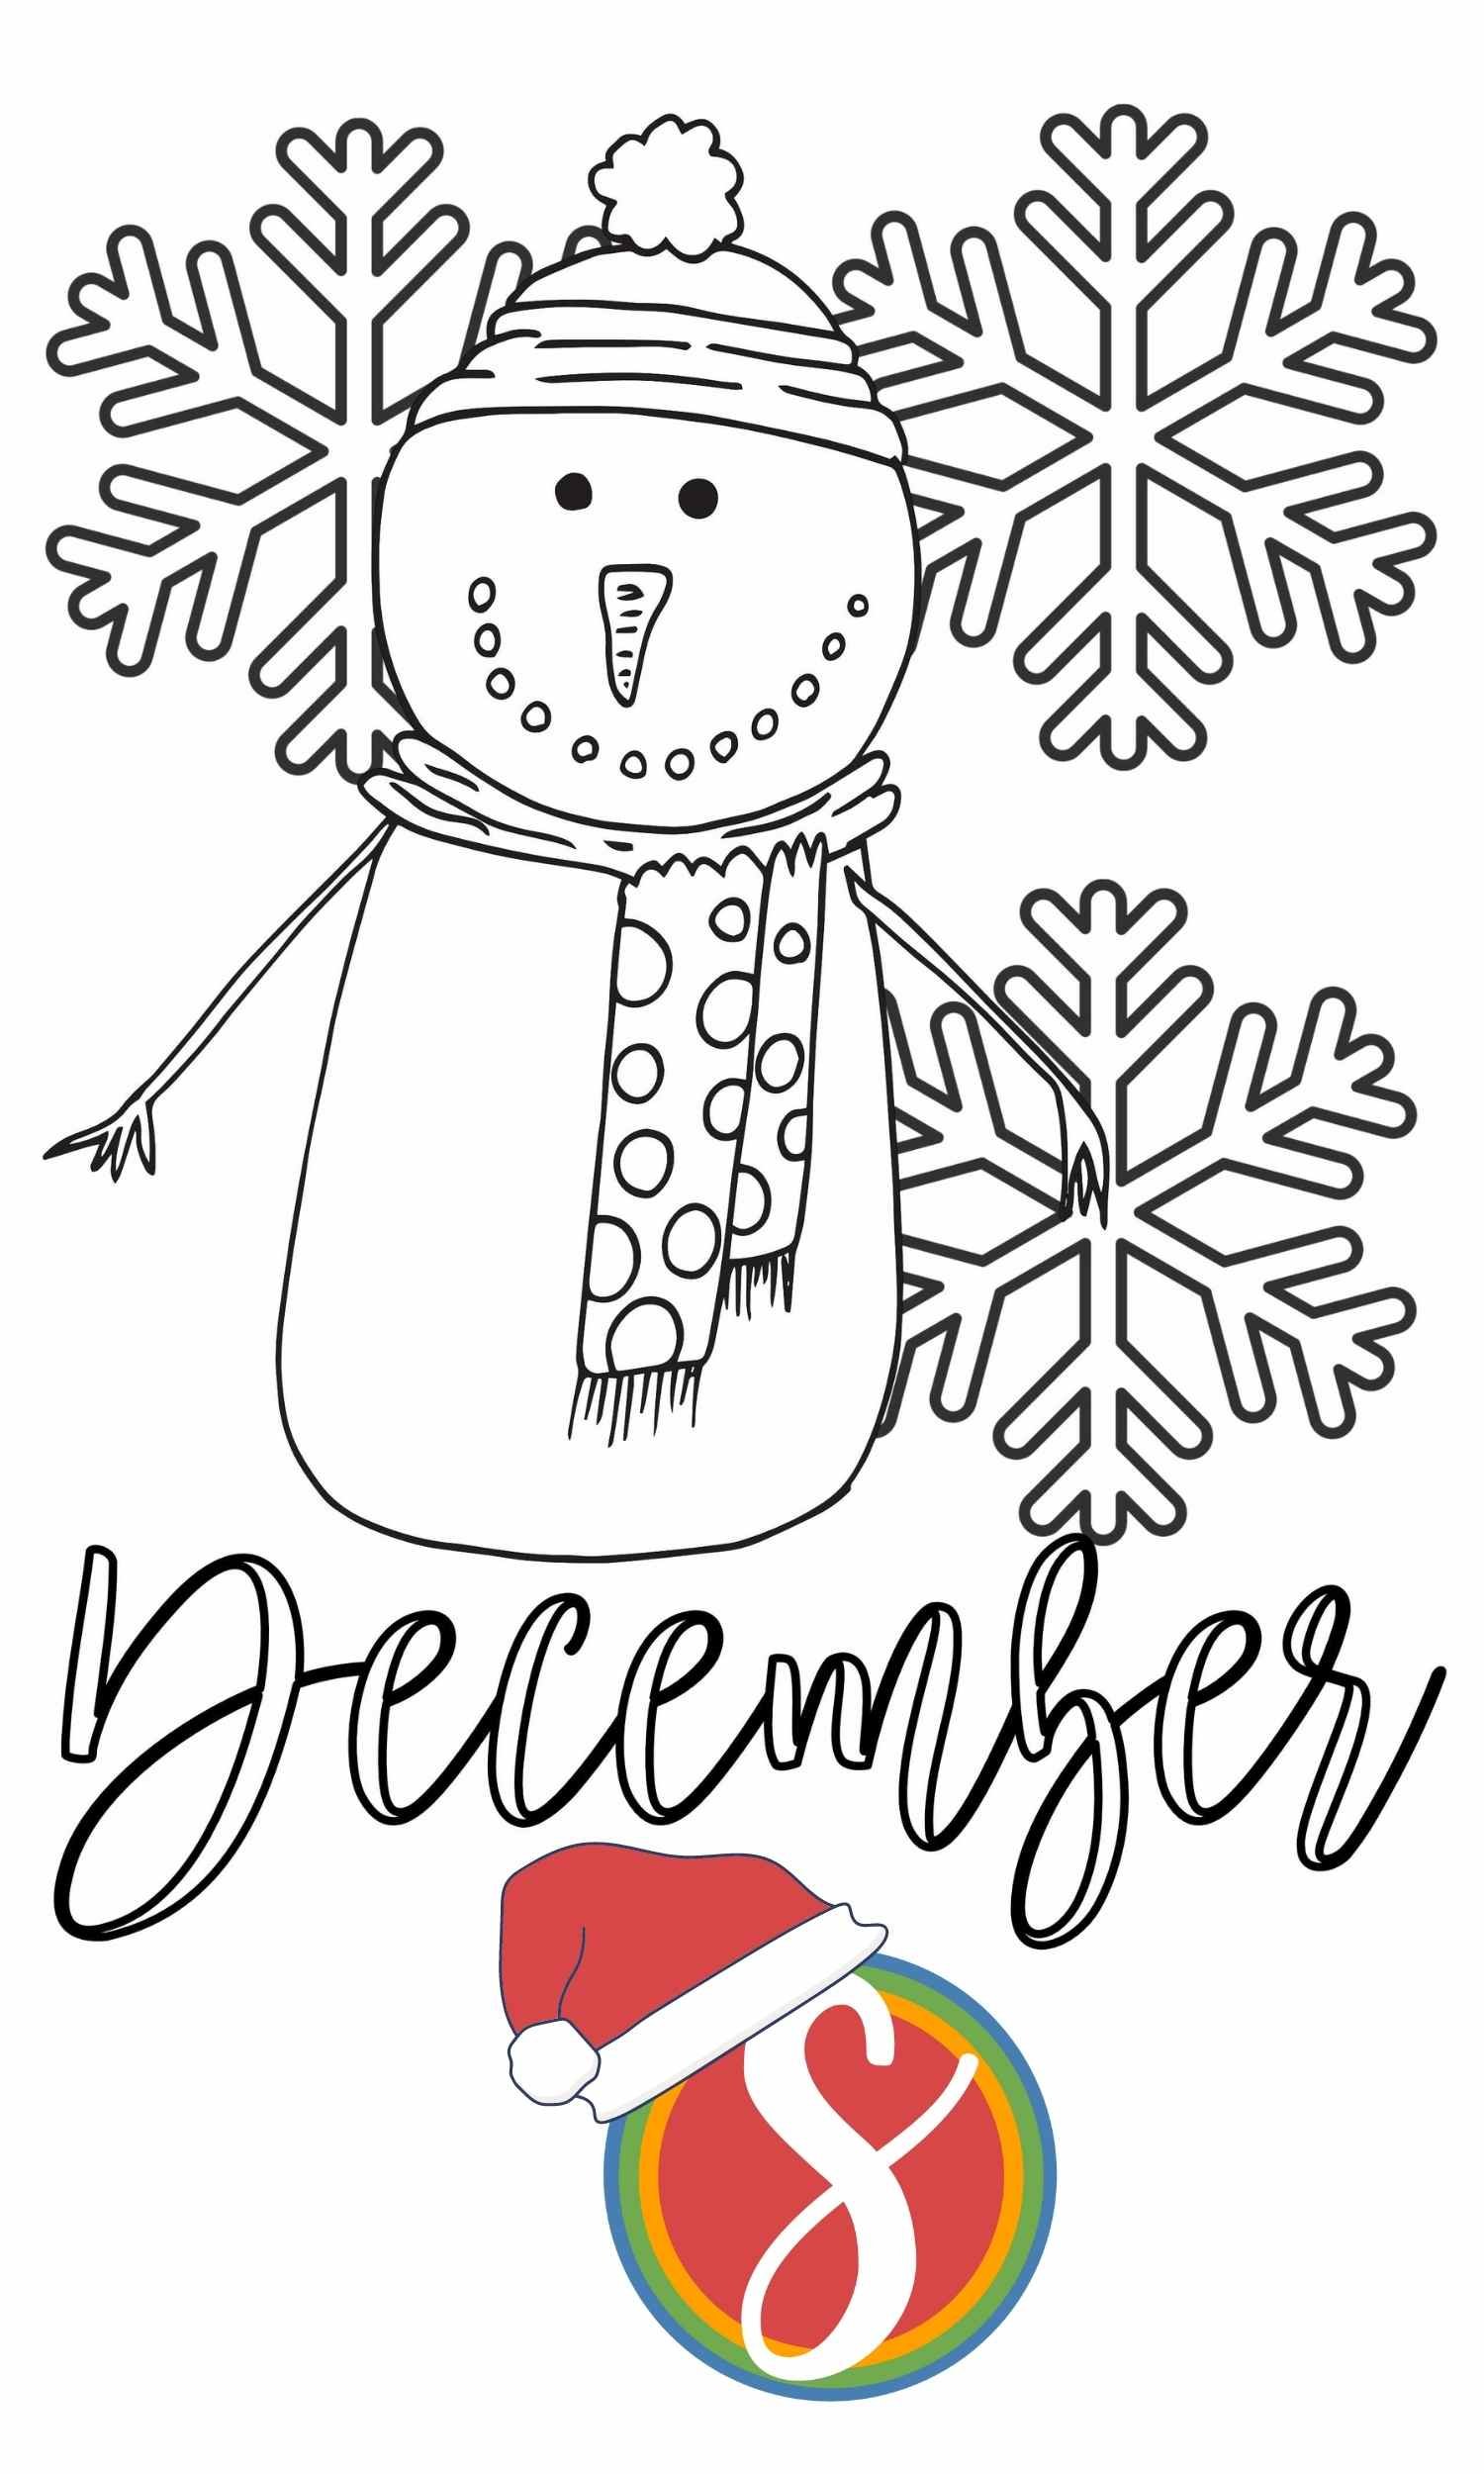 snowman to color with snowflakes in the background and colorable word "December"